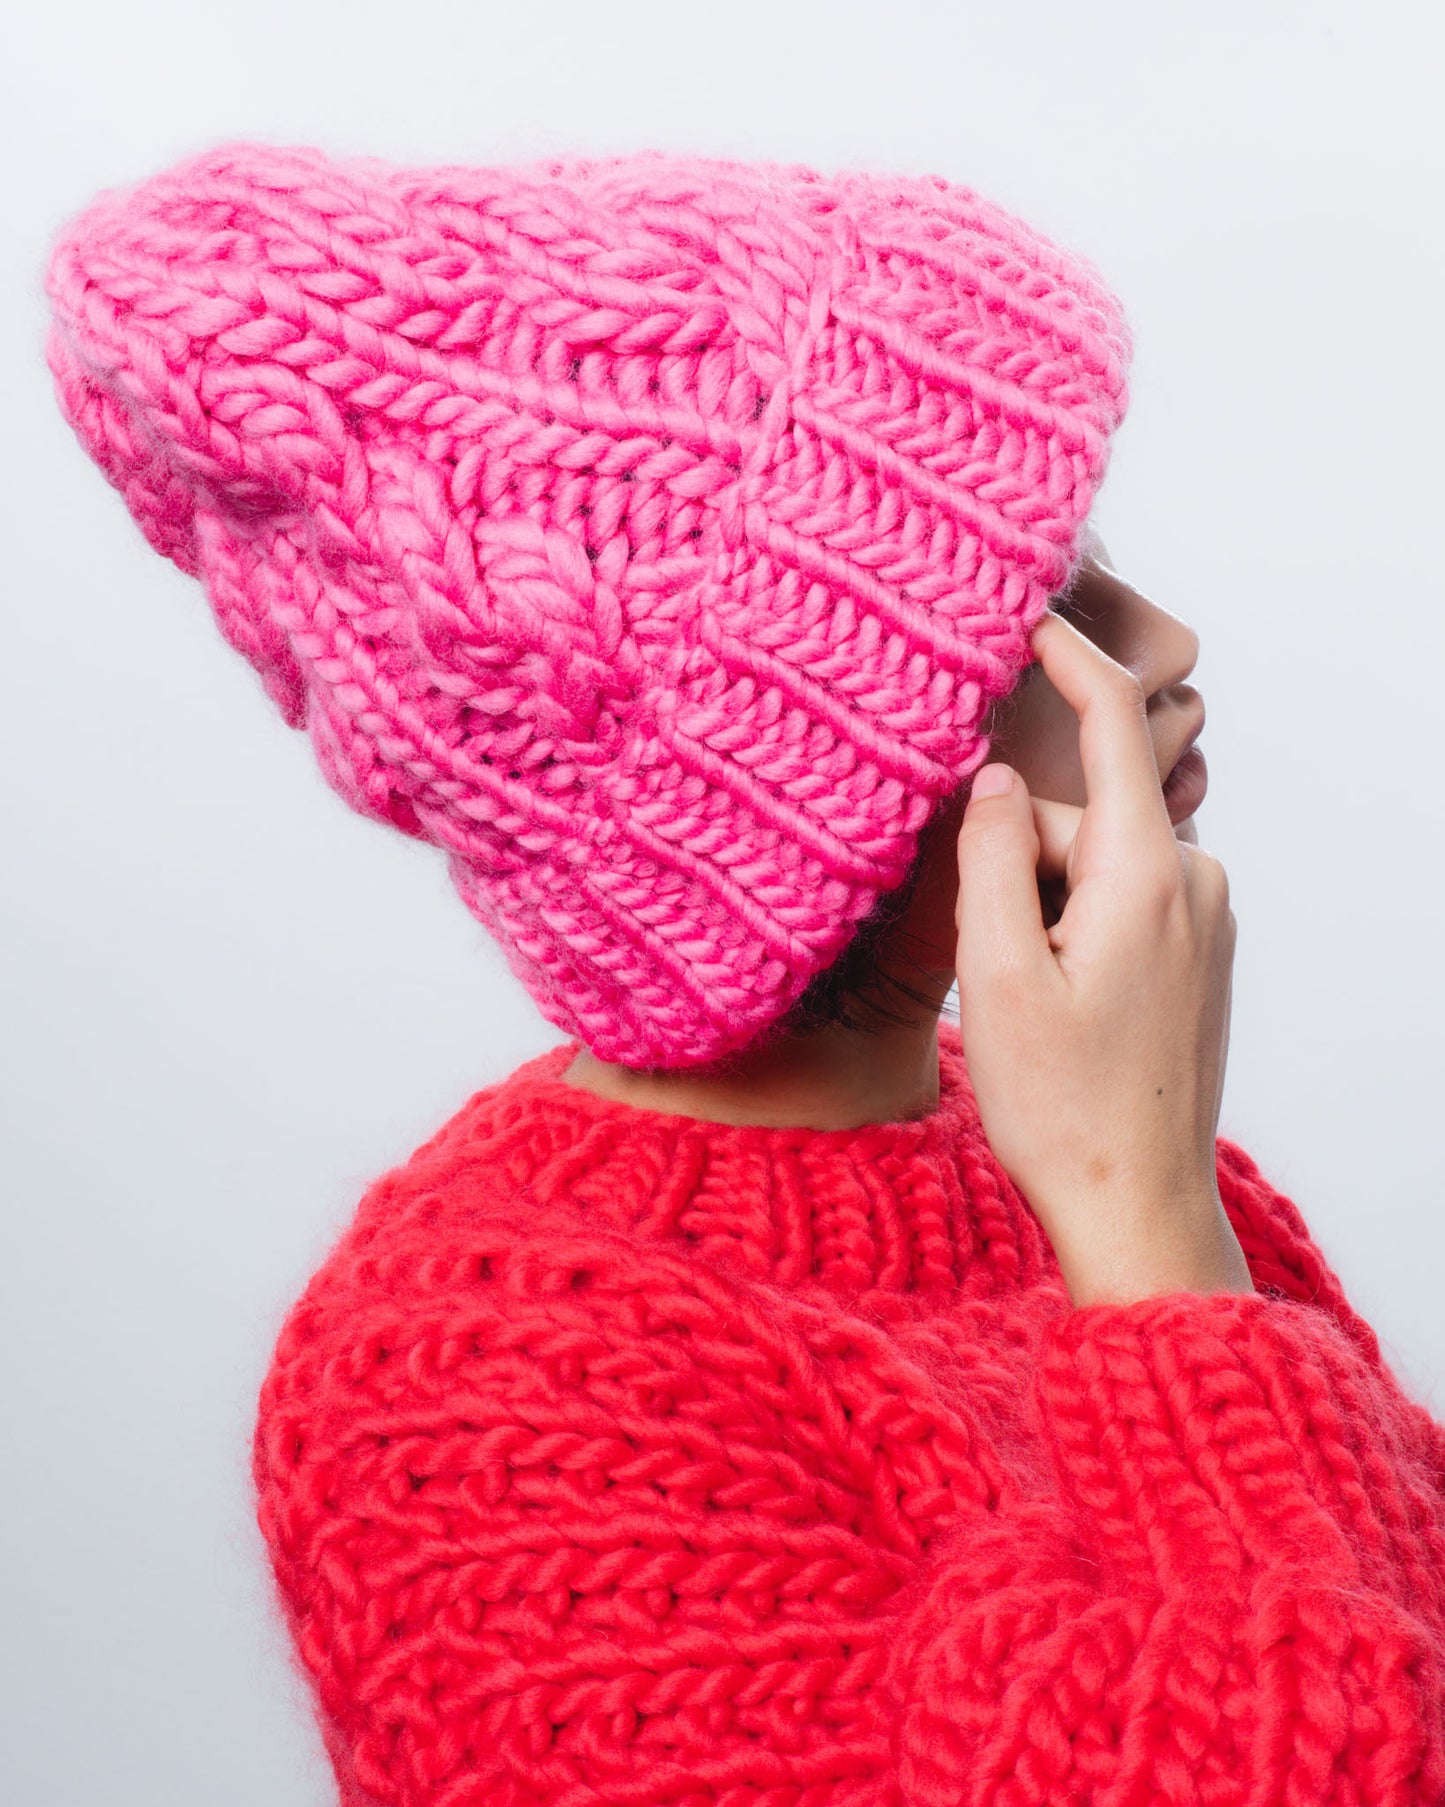 Cable beanie